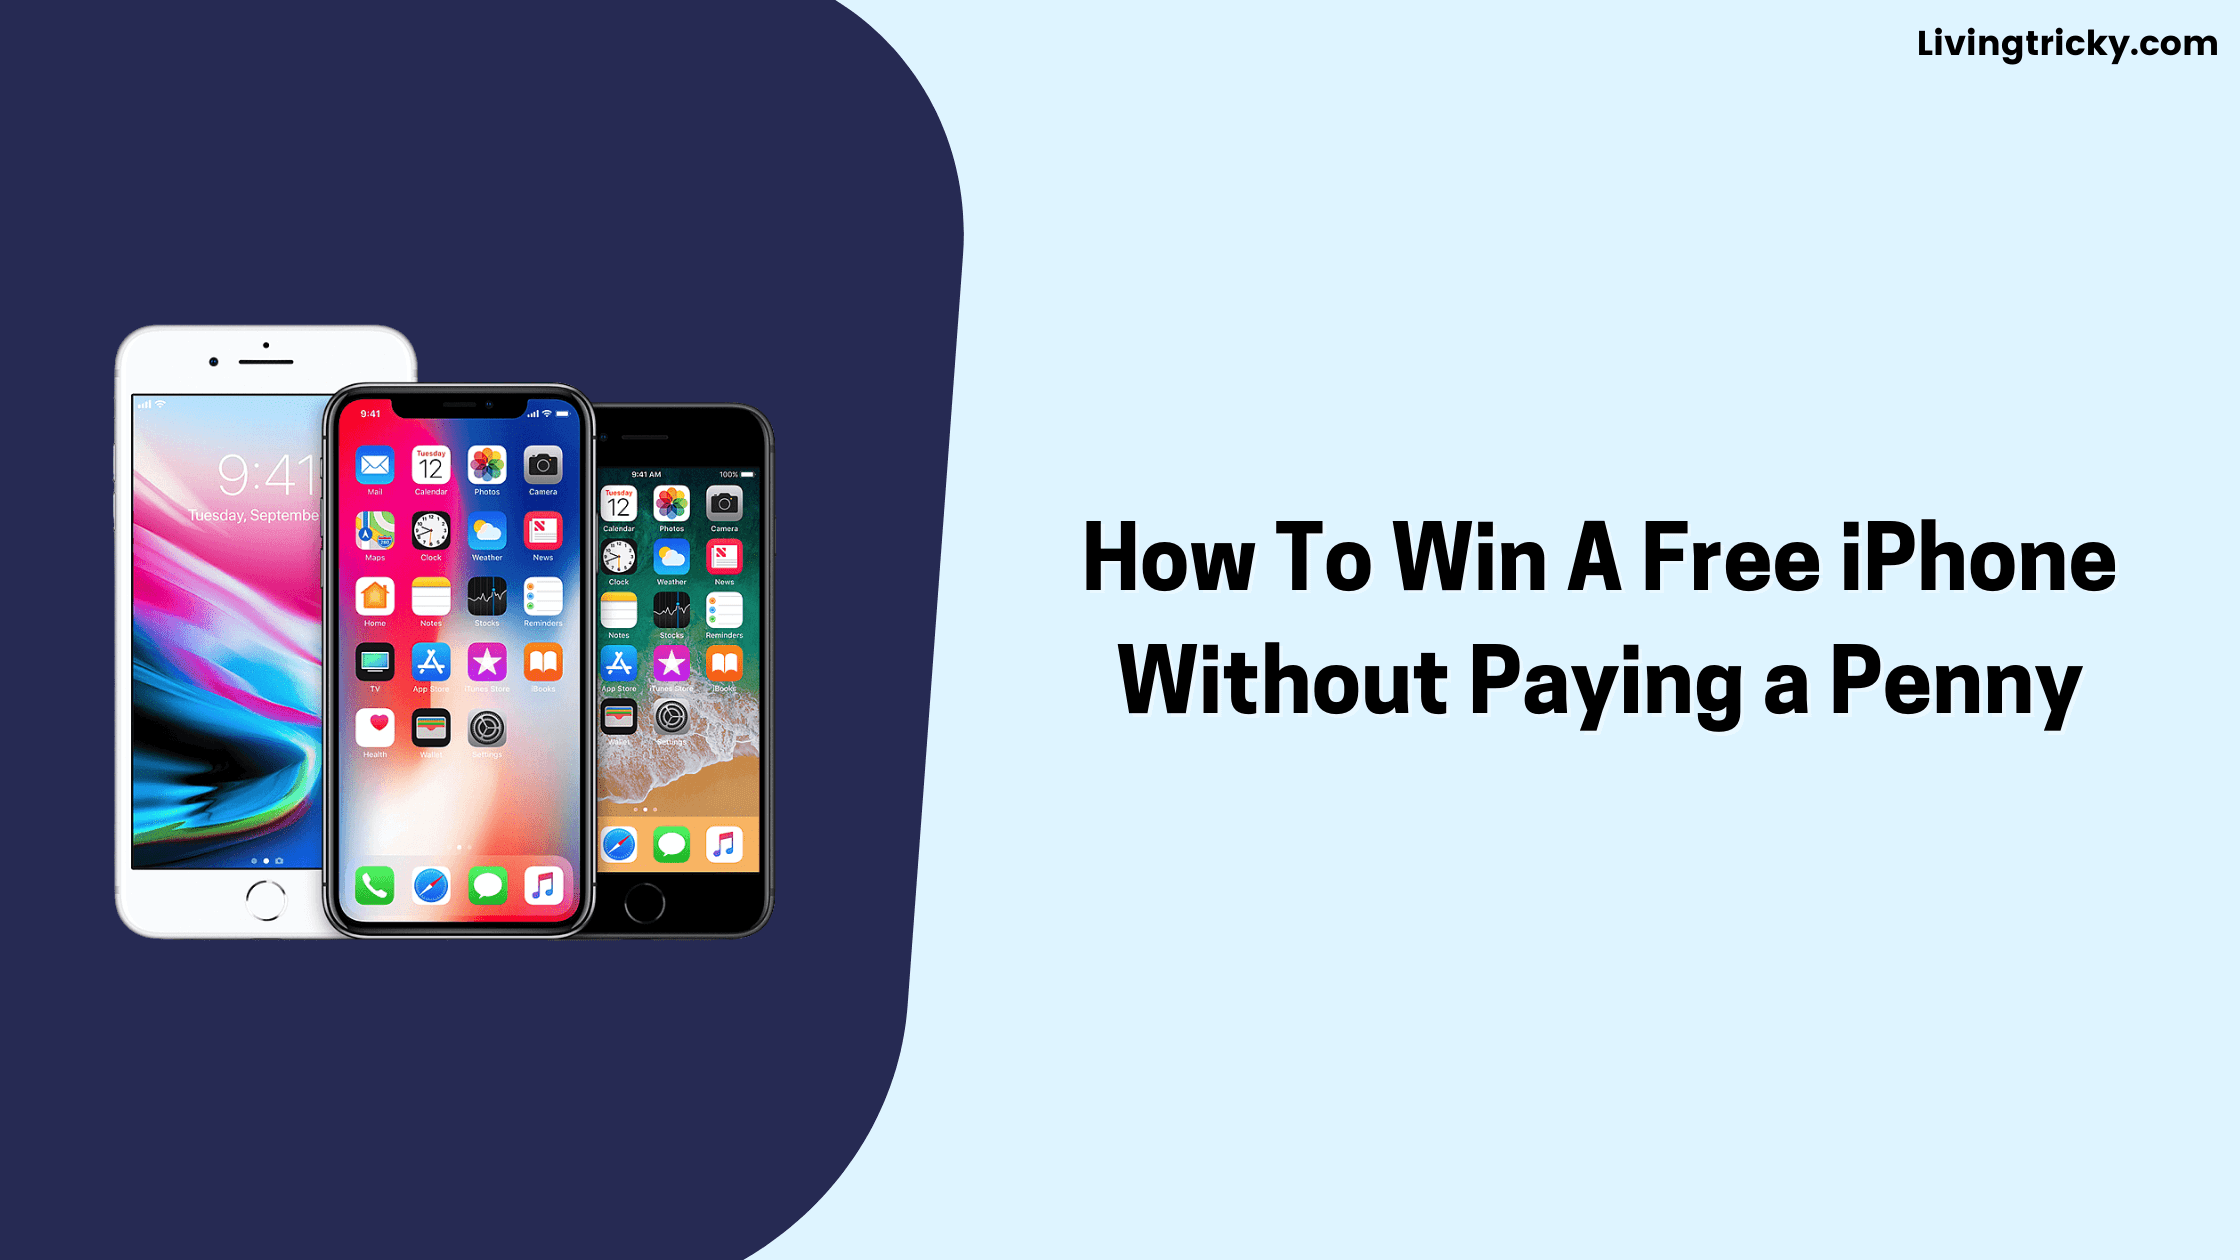 How To Win A Free iPhone Without Paying a Penny